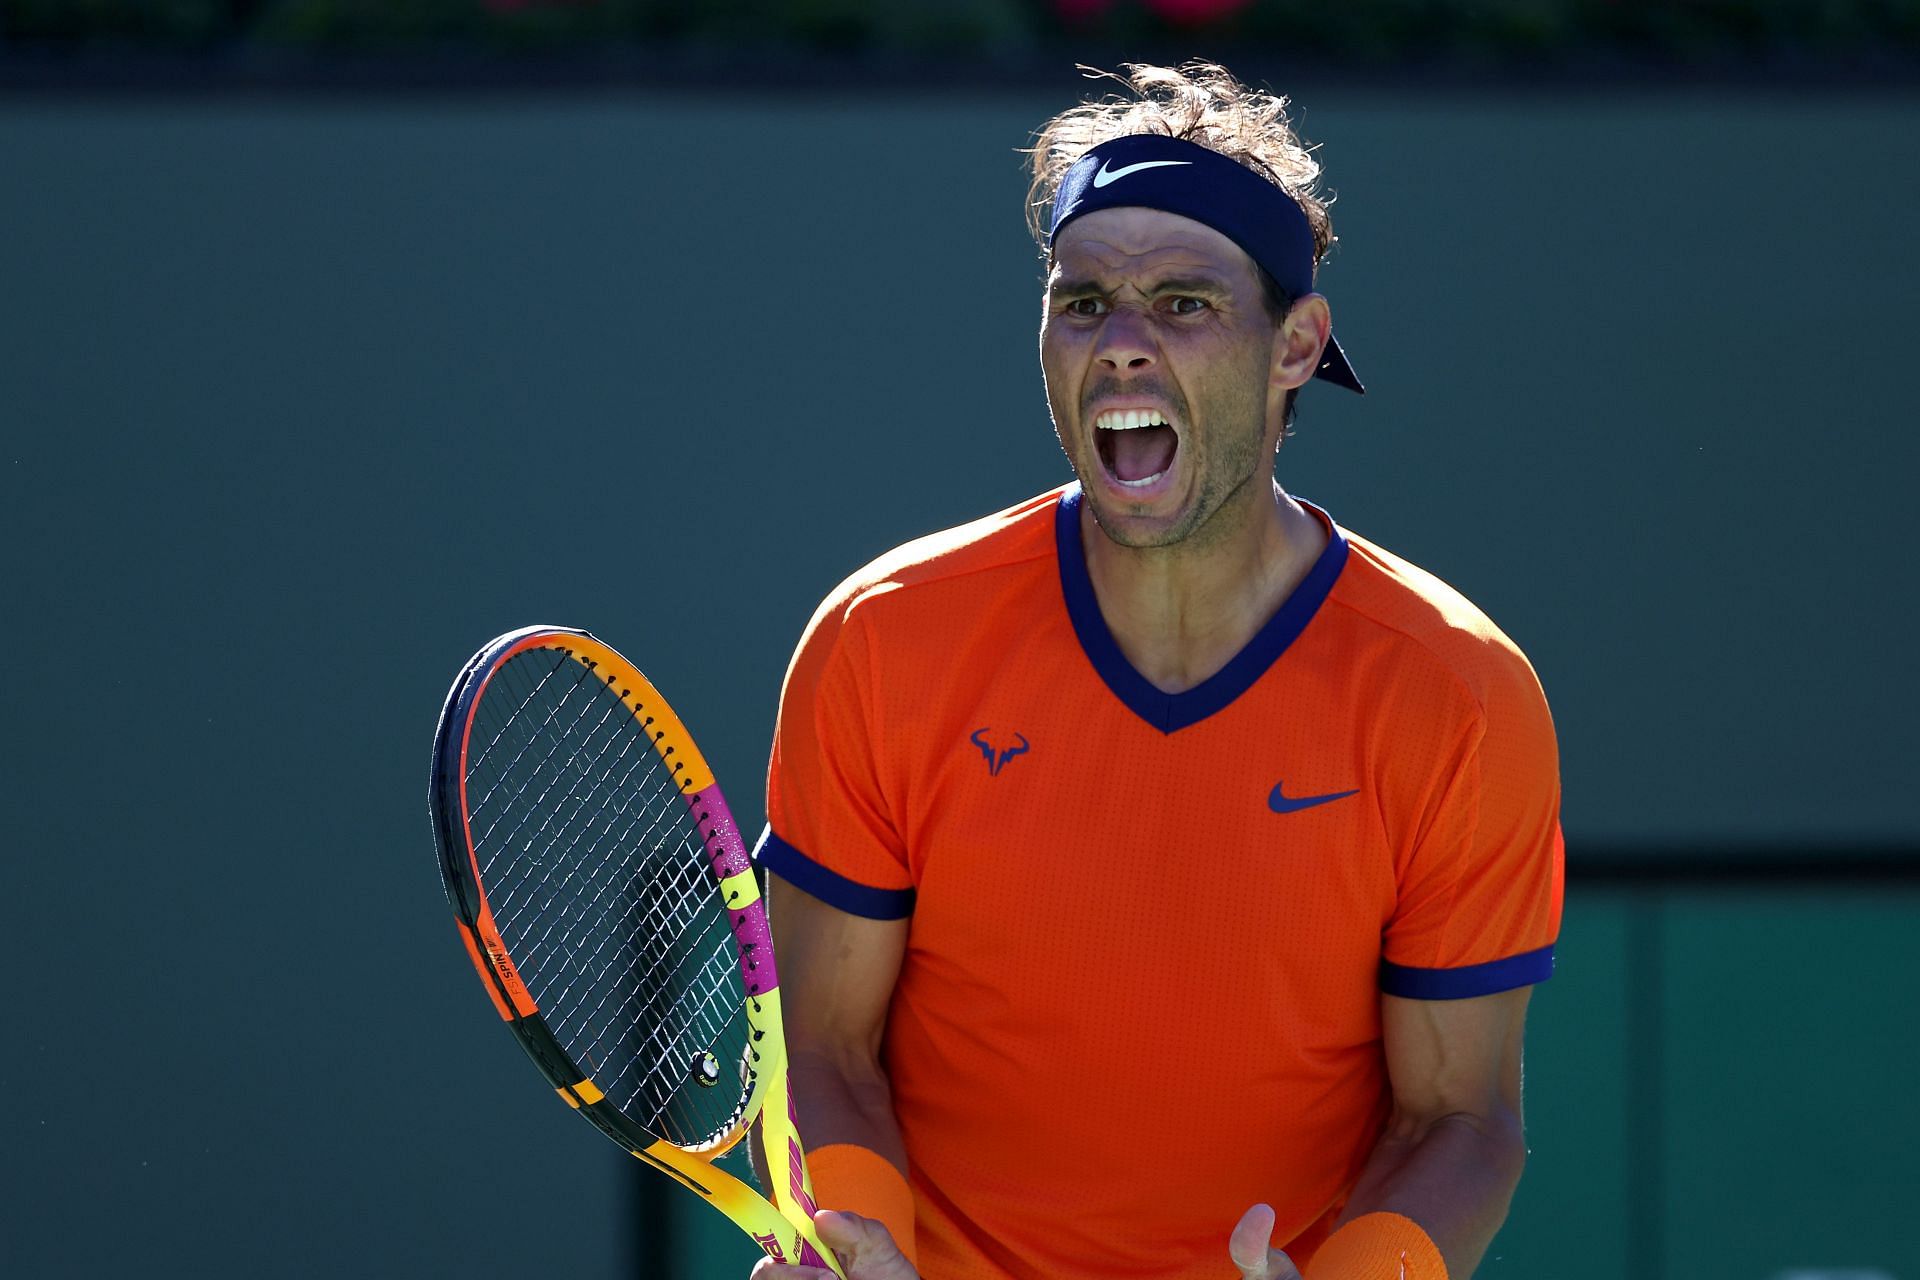 Rafael Nadal locks horns with Dan Evans in the third round of the 2022 Indian Wells Masters